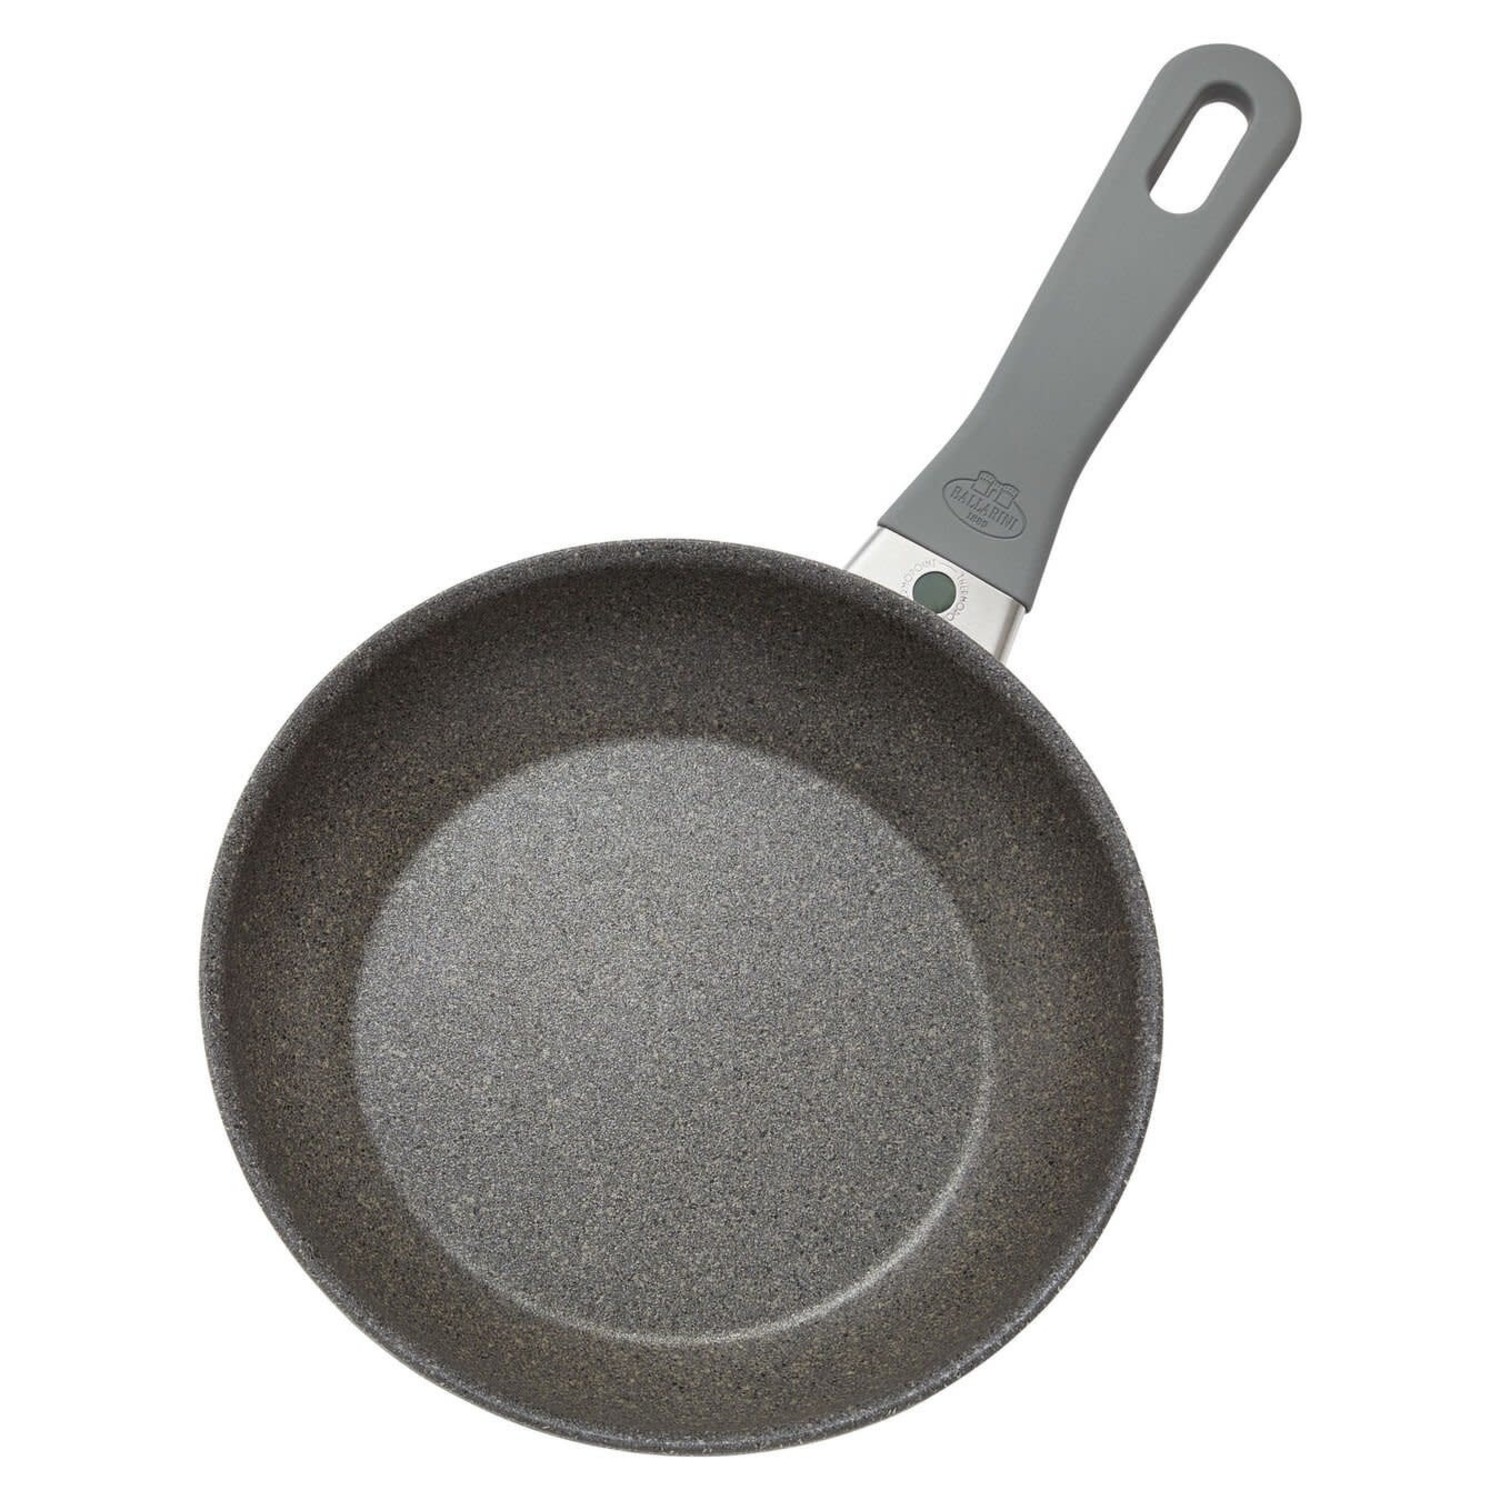 Zwilling Energy Plus 8-Inch Stainless Steel Ceramic Nonstick Fry Pan